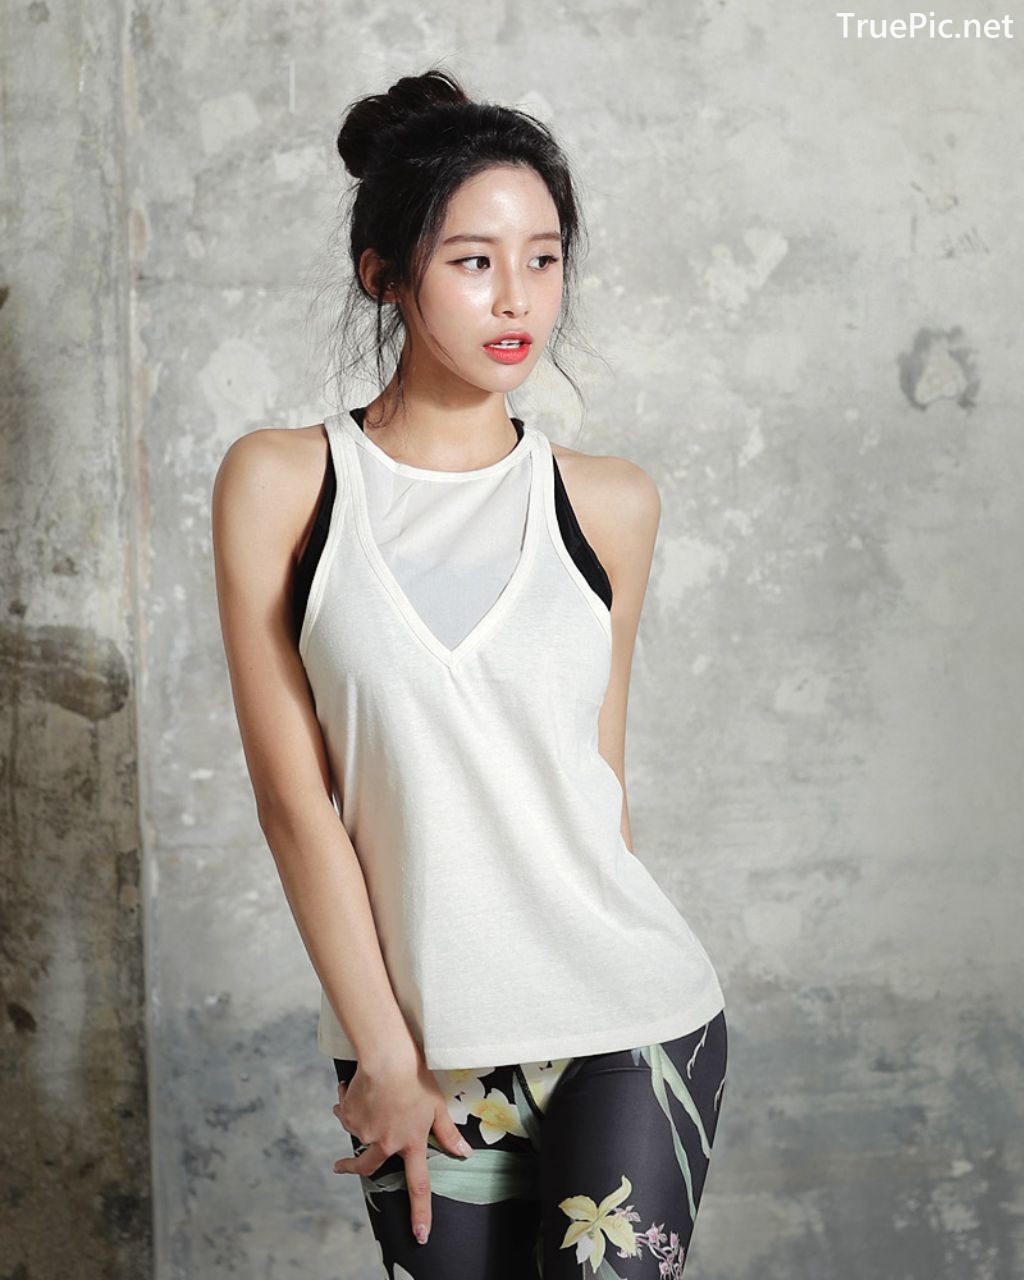 Image-Korean-Fashion-Model-Ju-Woo-Fitness-Set-Collection-TruePic.net- Picture-119